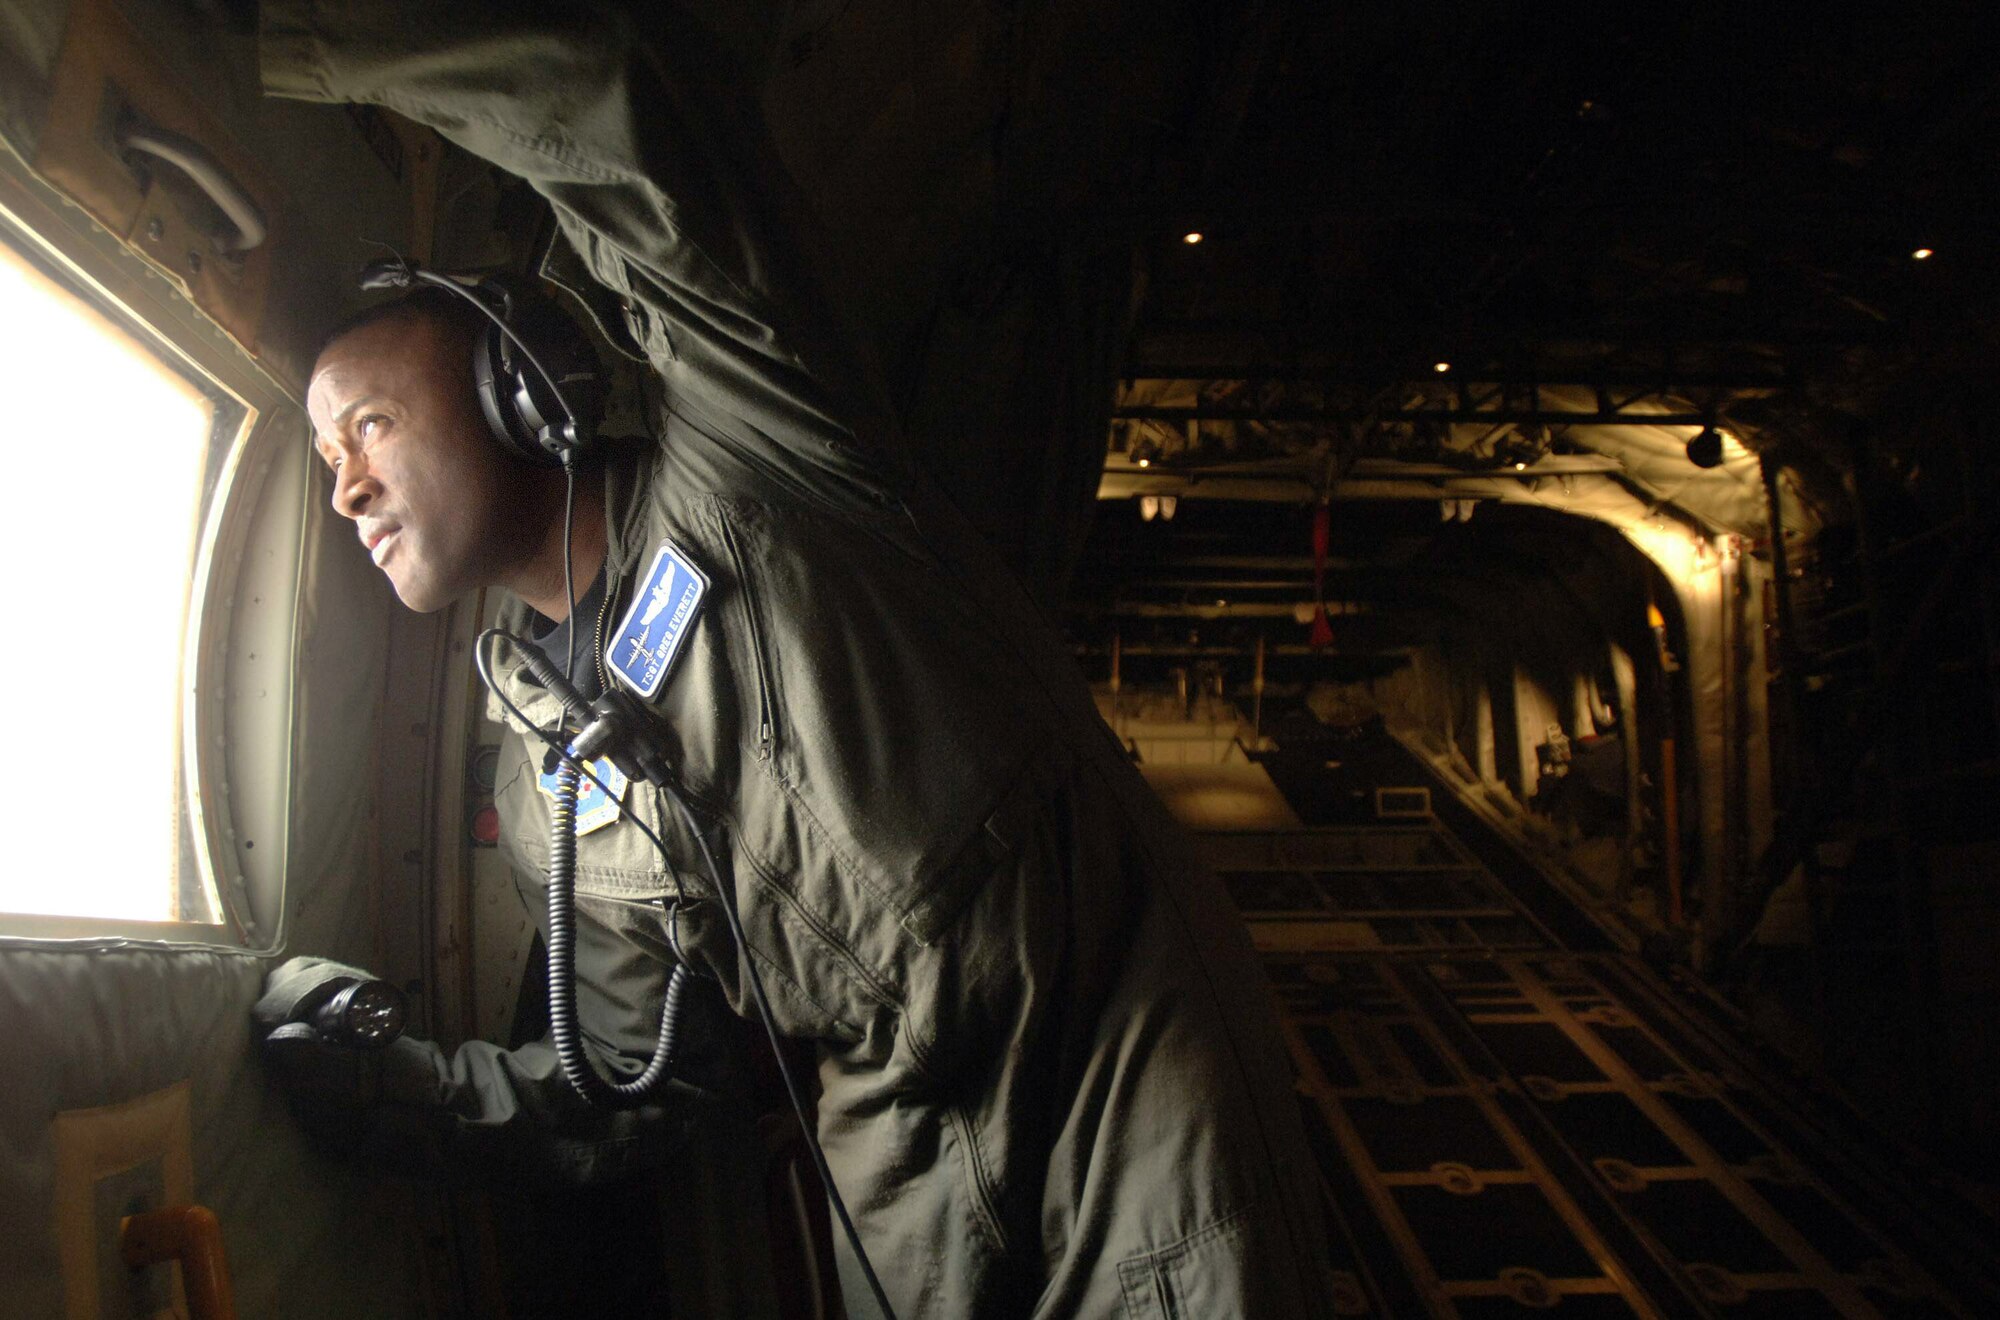 Minutes after departure from Spangdahlem Air Base, Germany, Tech. Sgt. Greg Everett, a C-130J Super Hercules loadmaster, performs a visual inspection of the wings and engines of a new J-model with fewer than 24 hrs of logged flight time. The aircraft was completing the last leg of its trans-Atlantic journey from the aircraft assembly plant in Marietta, Ga. to its new home station at Ramstein AB, Germany. . This J-model is the first of 14 aircraft that are scheduled to arrive at Ramstein over the next 12 months to replace the older E-models there.  (Defense Department photo/Master Sgt. Scott Wagers)